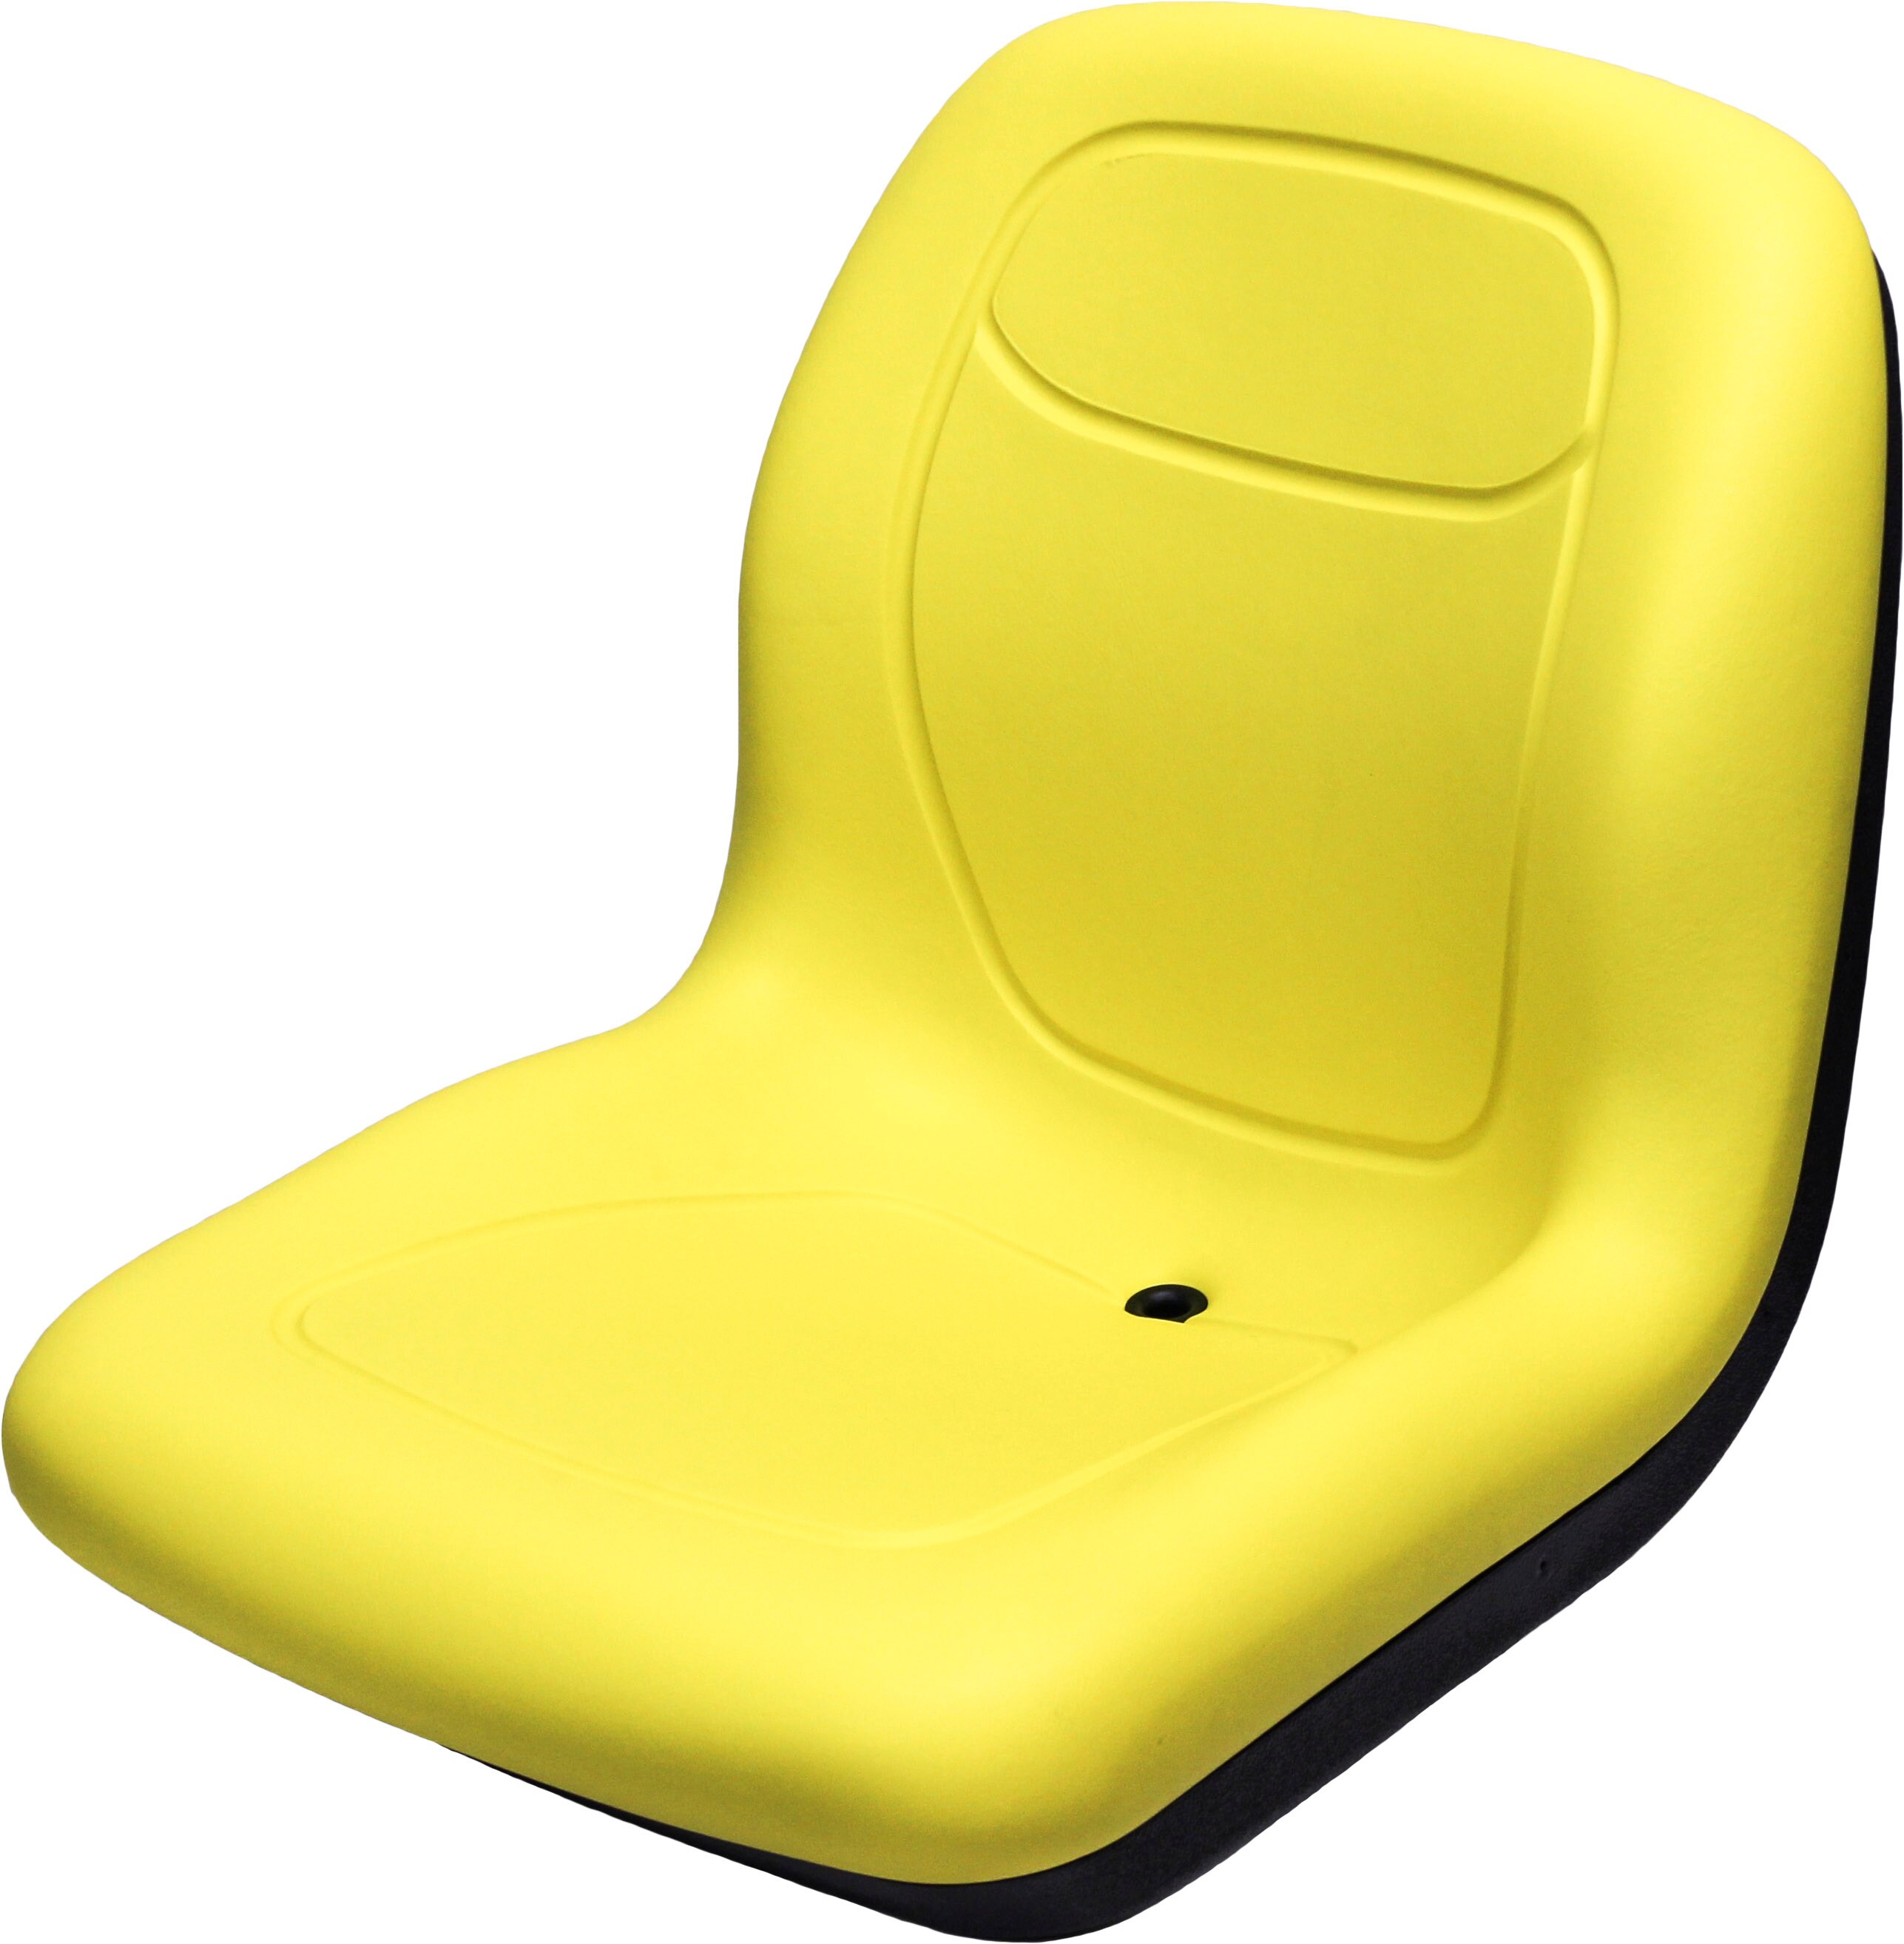 John Deere AM140435 Replacement Seat for sale online 